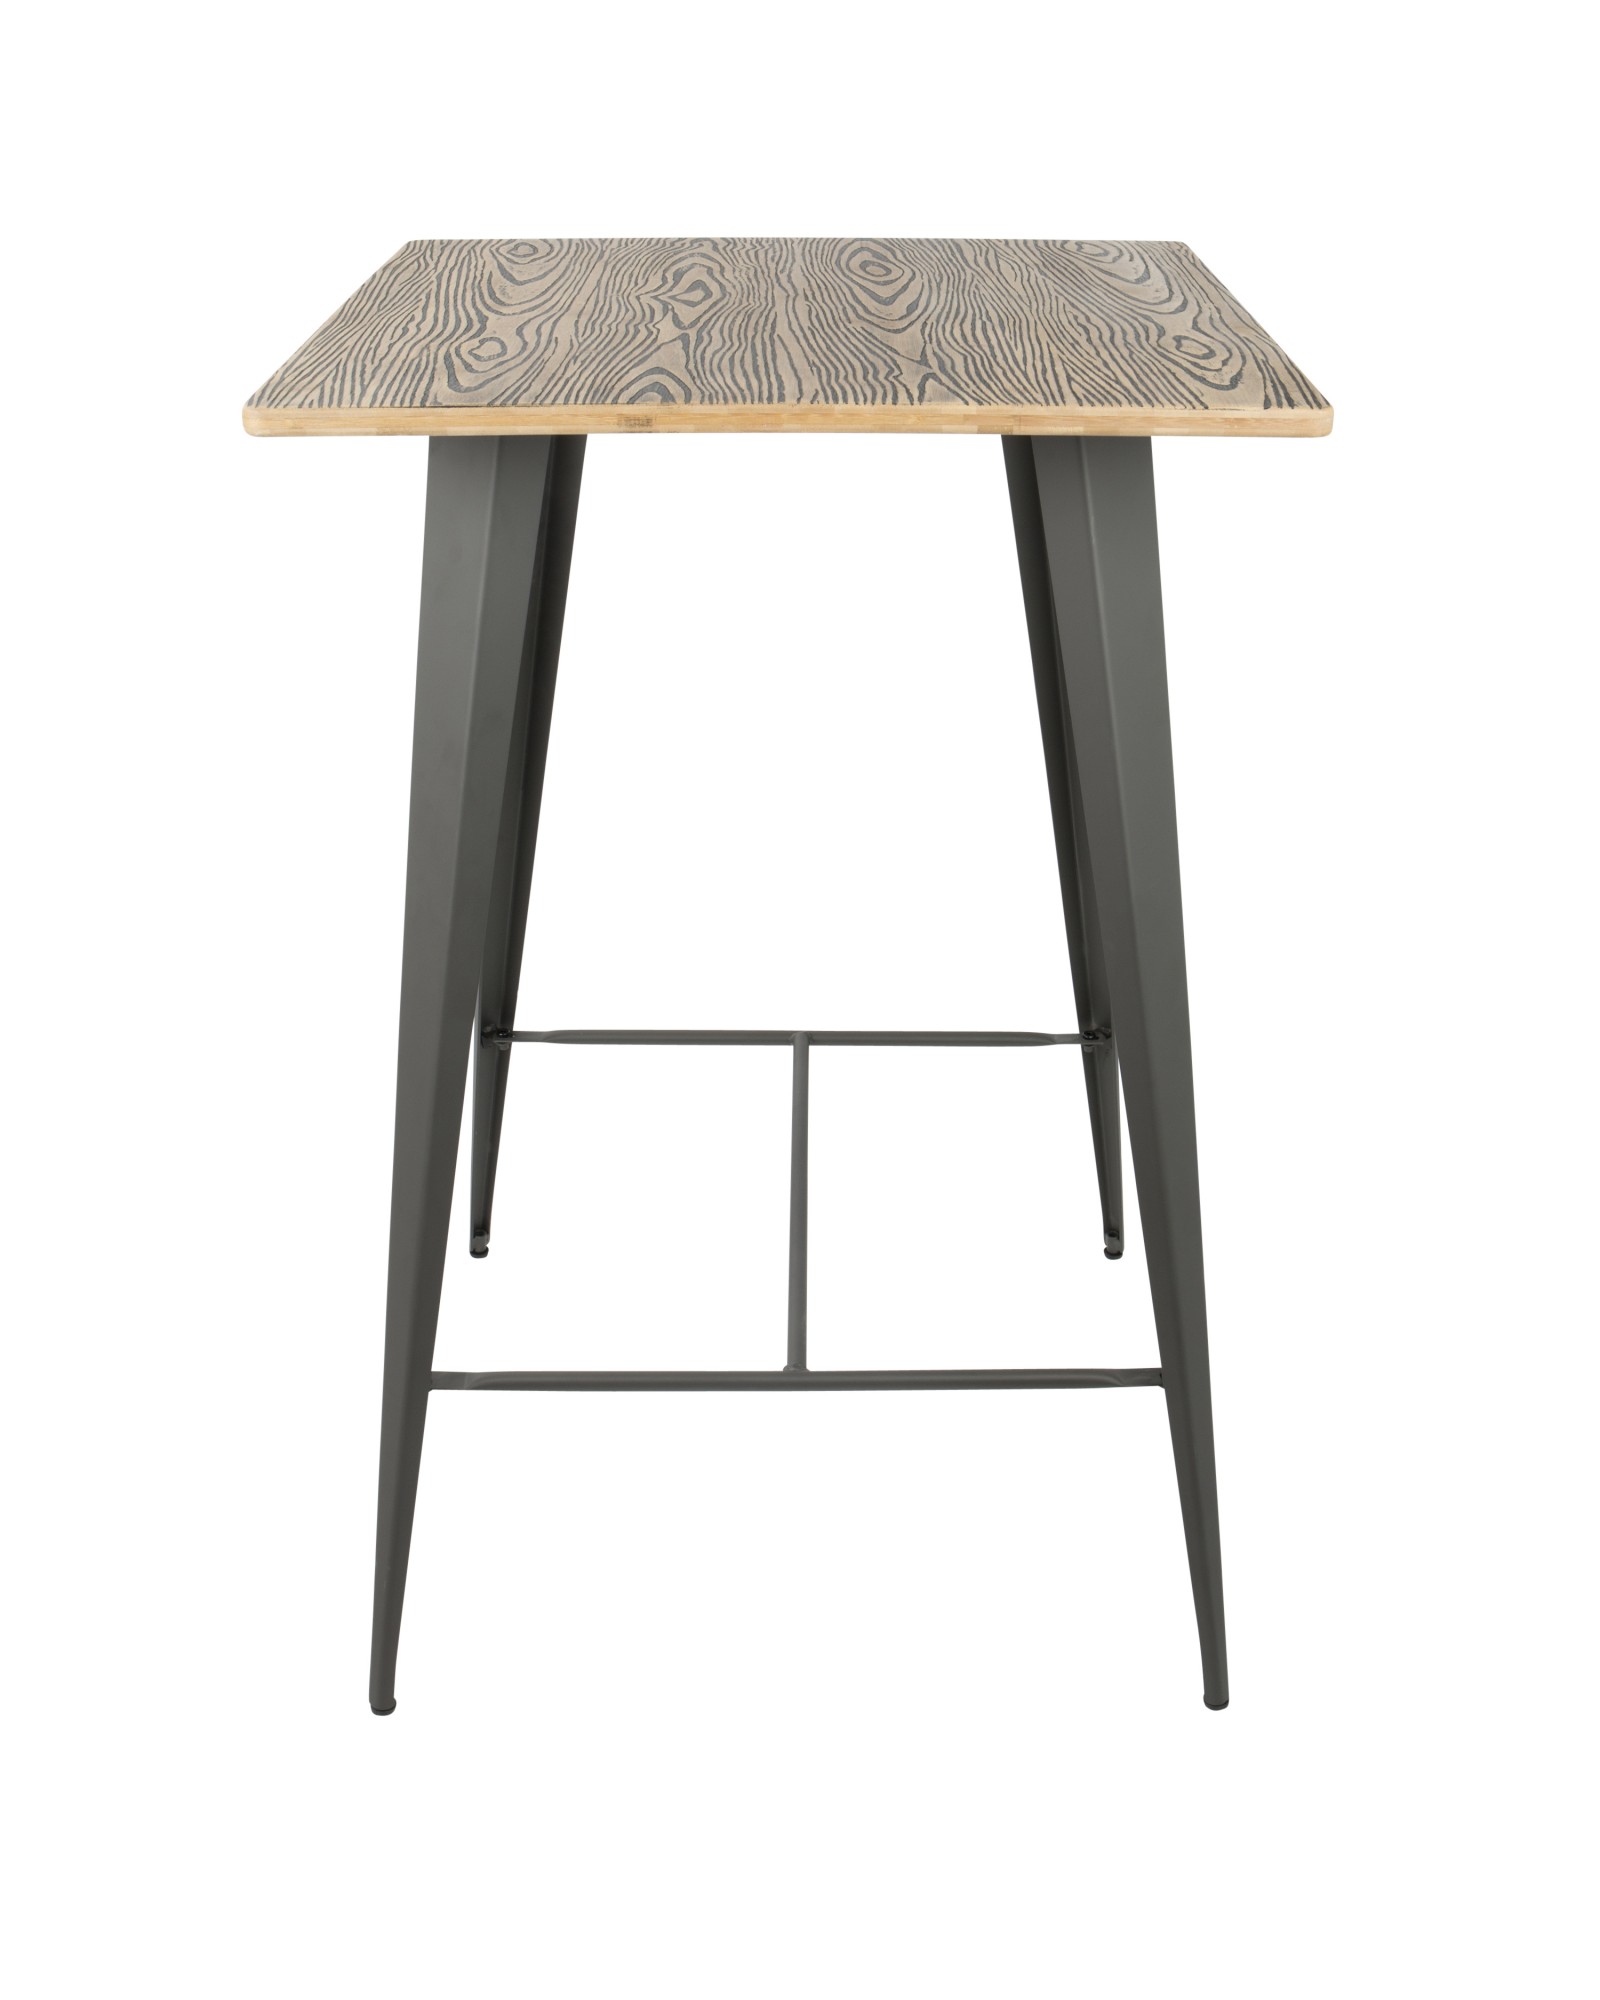 Oregon Industrial Table in Grey and Brown LumiSource